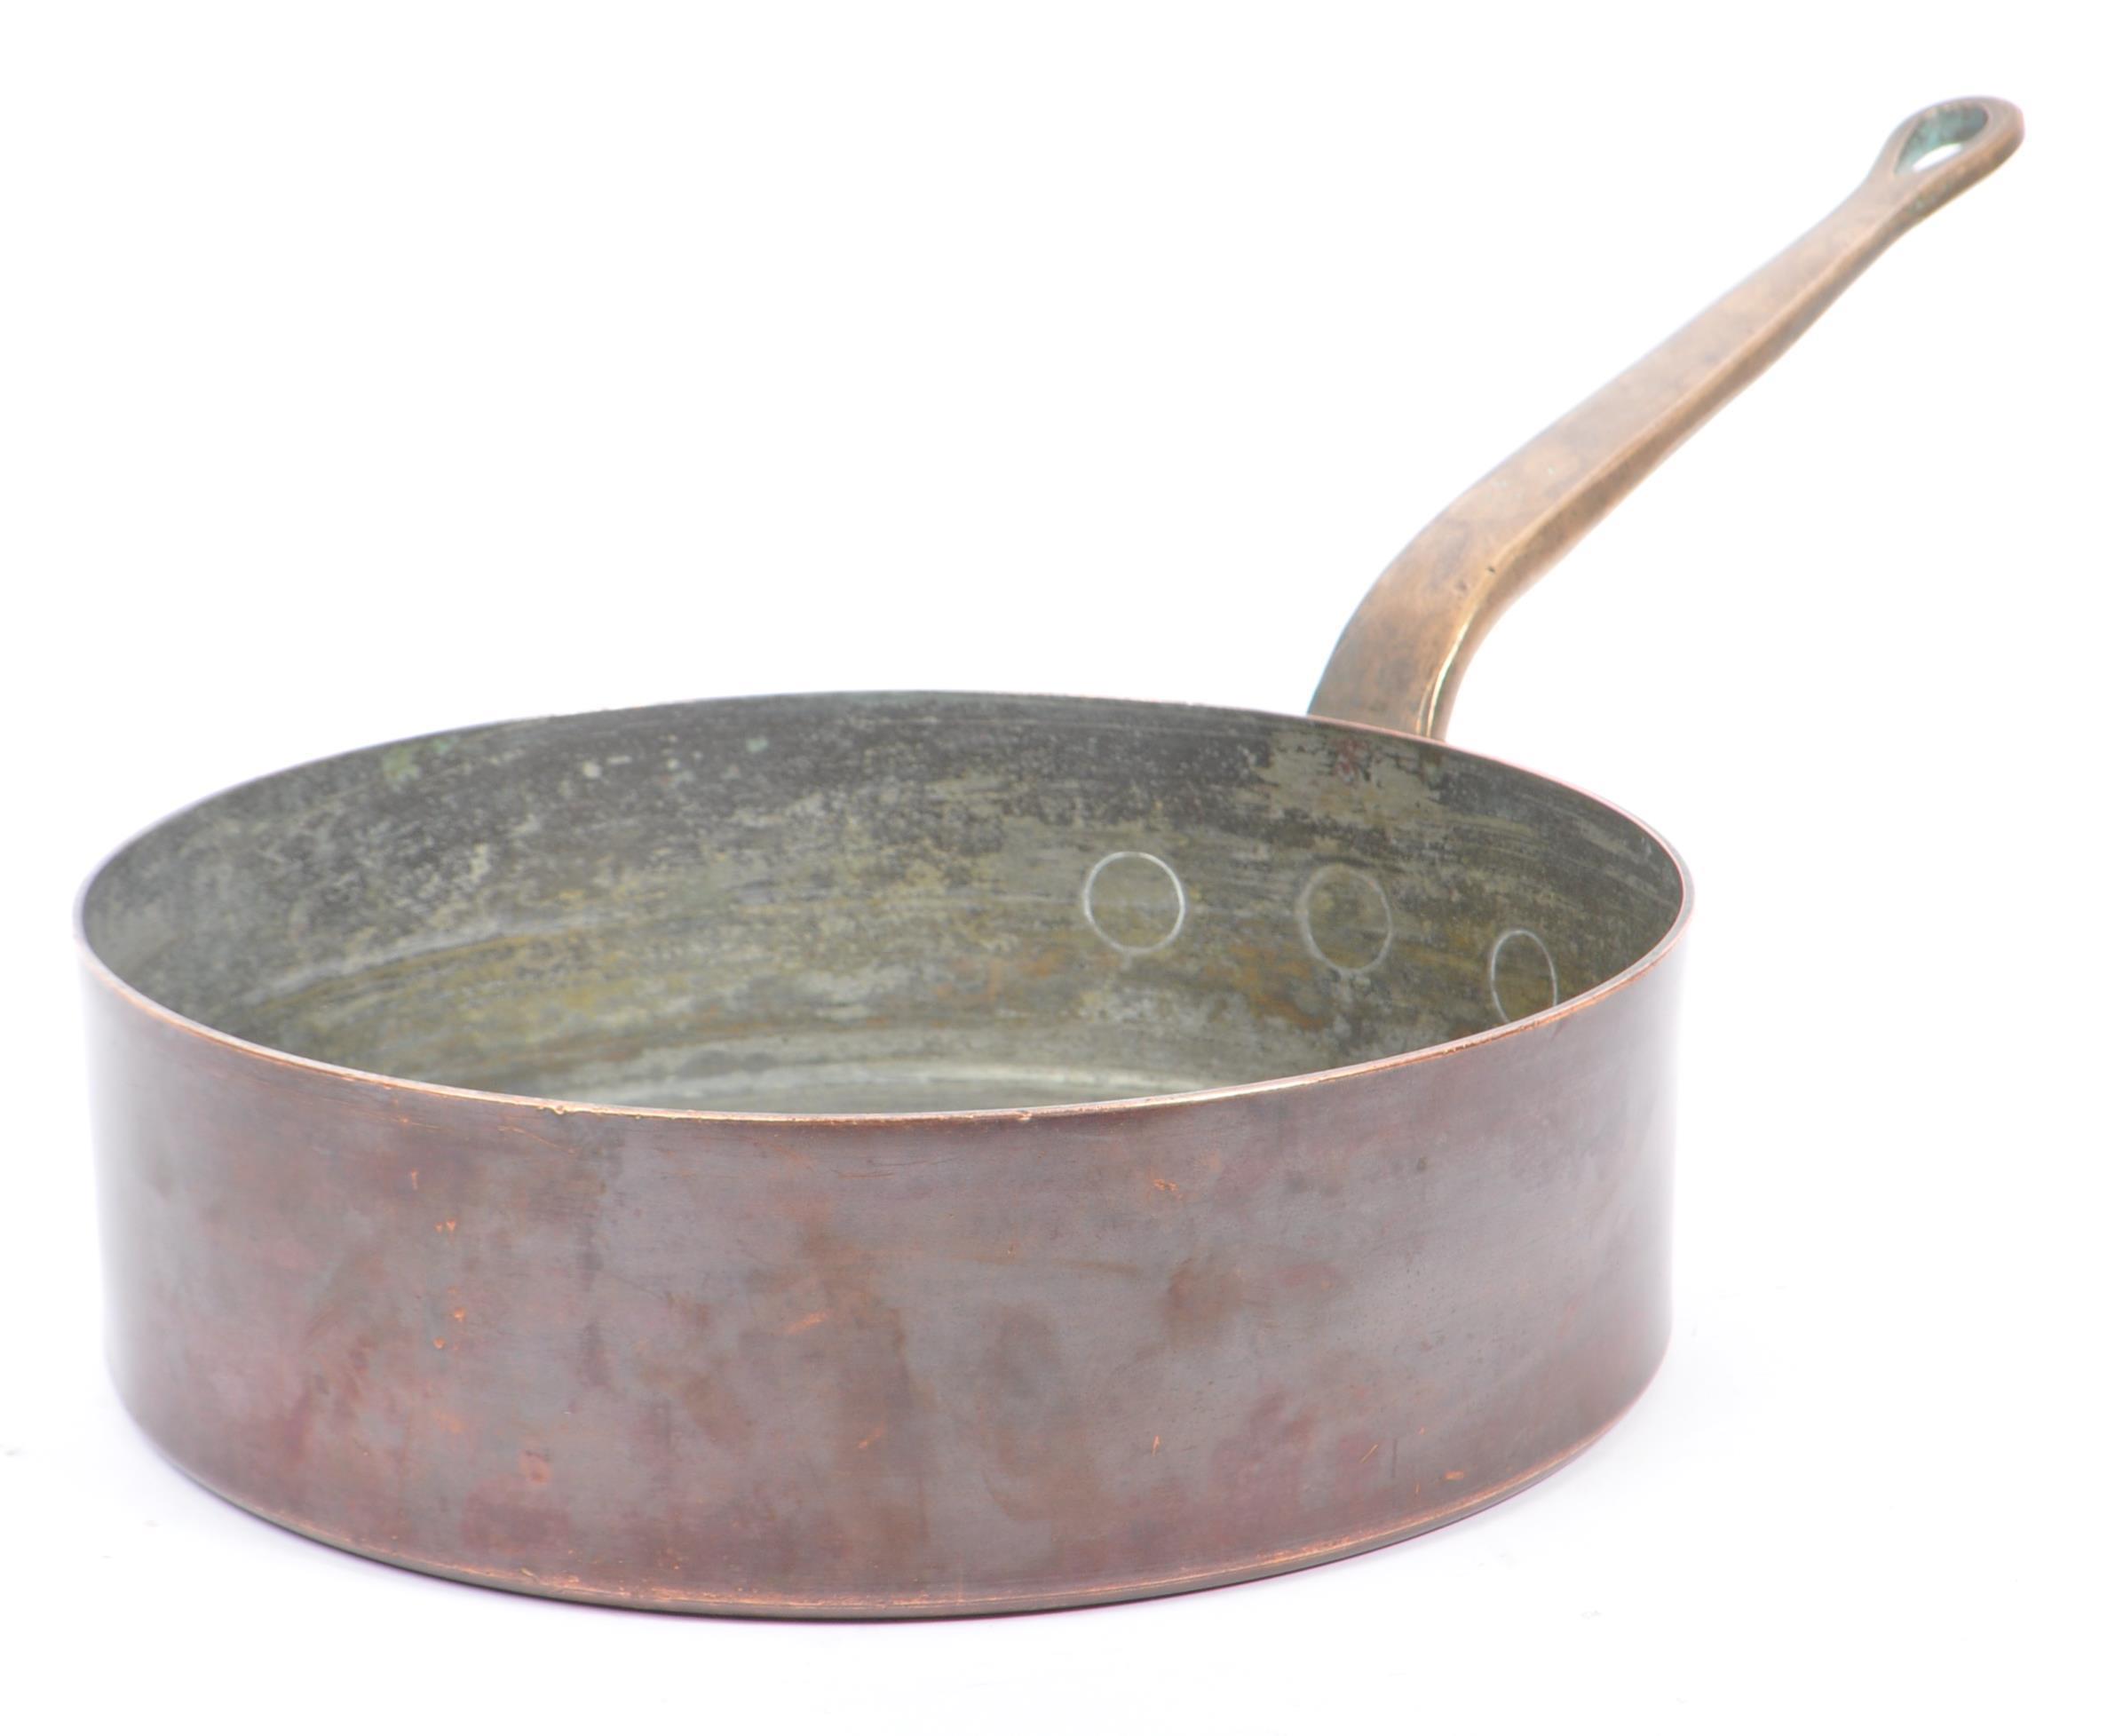 LARGE HEAVYWEIGHT MID 20TH CENTURY COPPER & BRONZE SKILLET PAN - Image 2 of 5